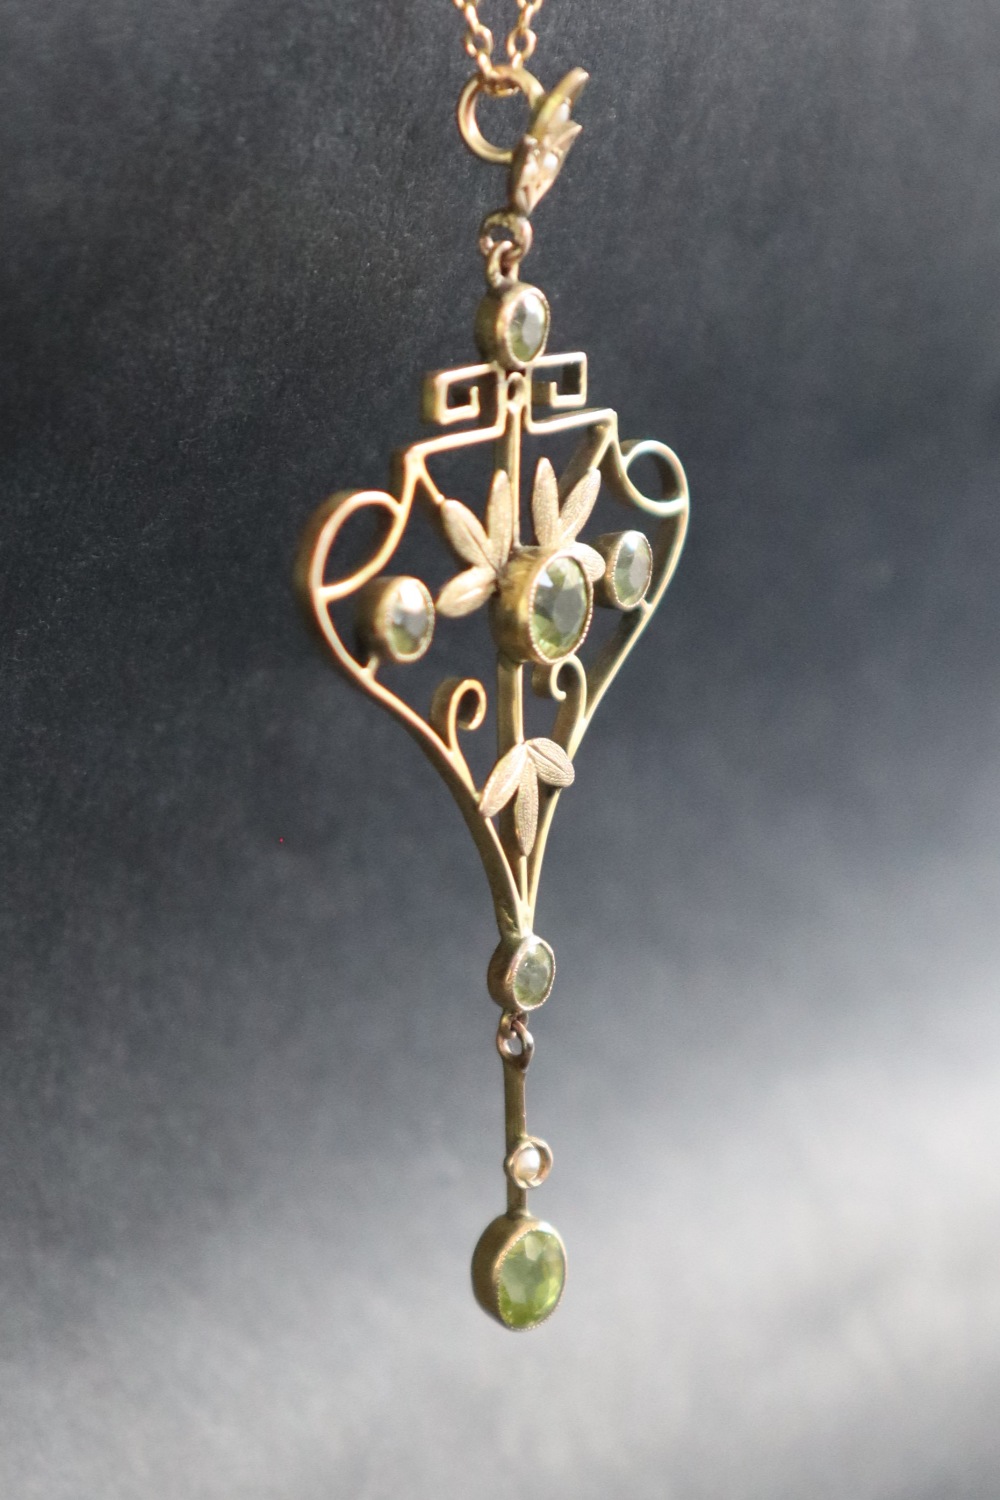 A yellow metal peridot and seed pearl pendant of heart and leaf shape on a yellow metal chain - Image 2 of 5